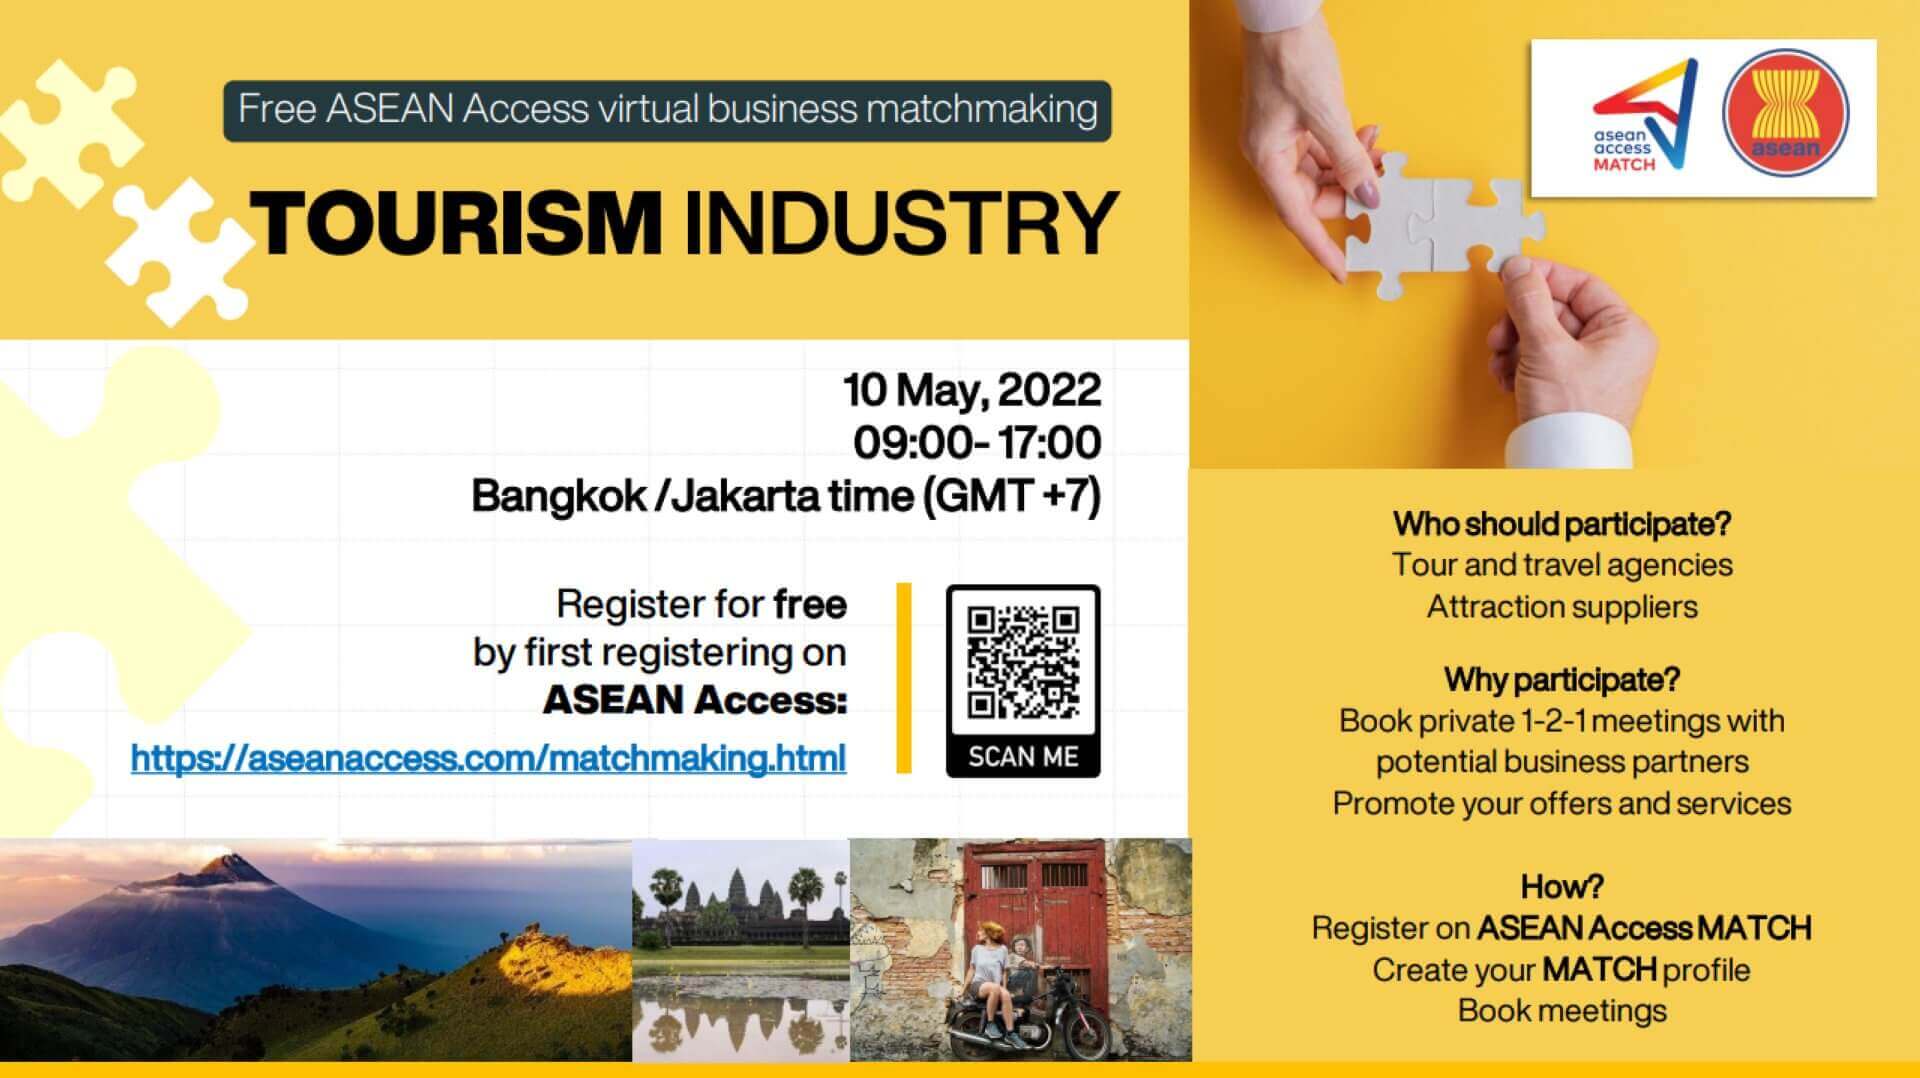 B2B Opportunity: Tourism Business Matchmaking - Free ASEAN Access (May 10, 2022 - 10:AM to 6:00PM Manila Time)